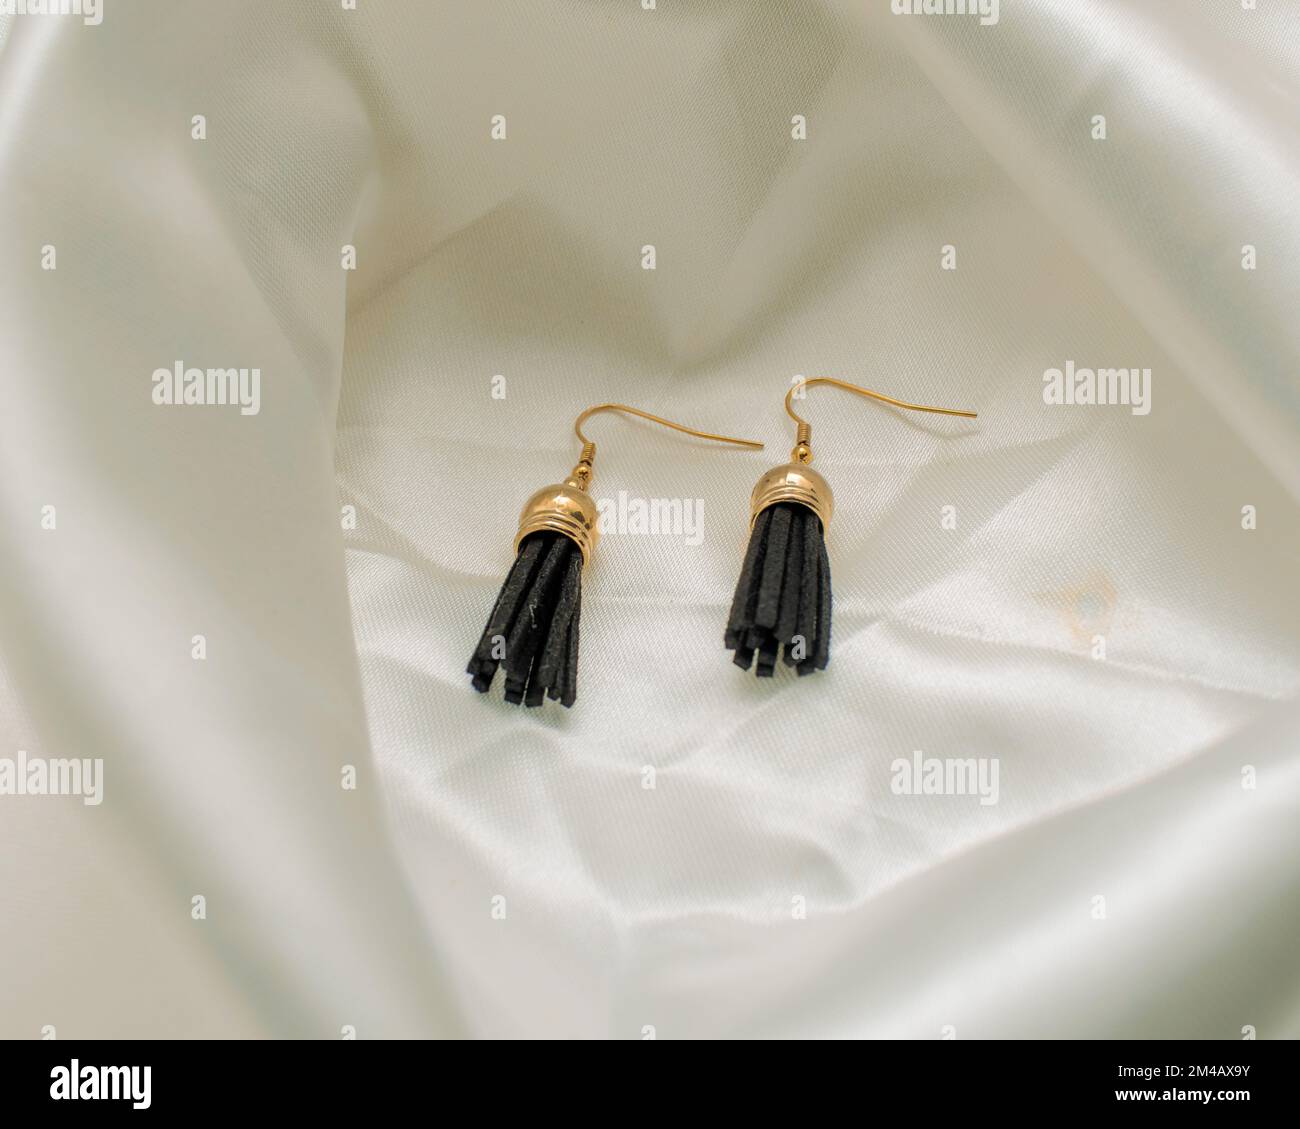 A closeup shot of black and gold earrings on a white background Stock Photo